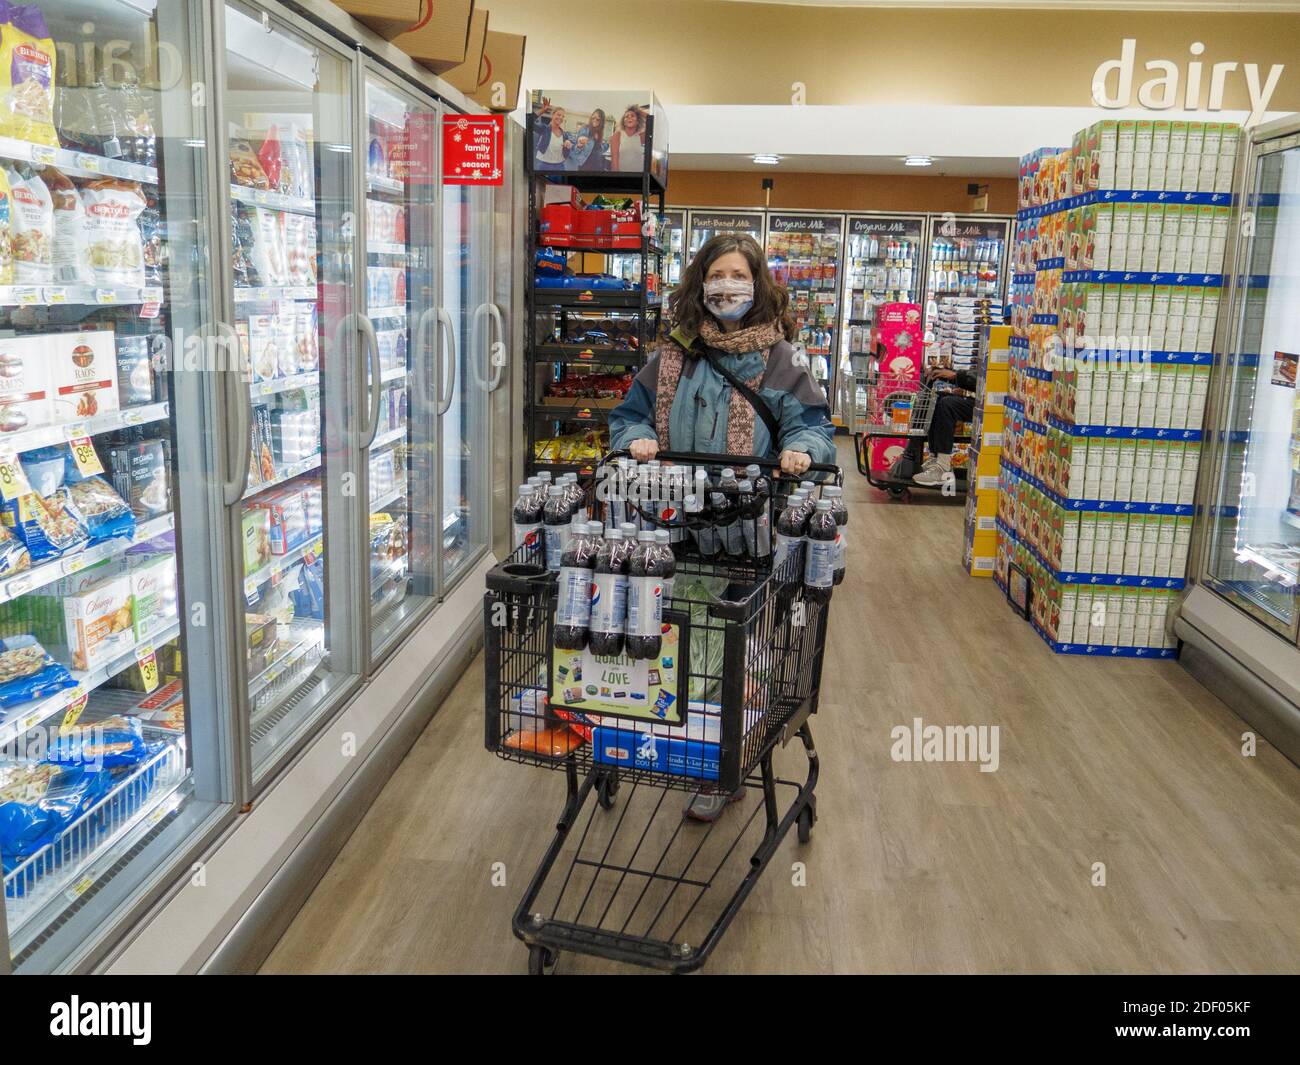 Woman wearing face mask while grocery shopping during COVID-19 pandimic. Chicago area, Illinois. Stock Photo